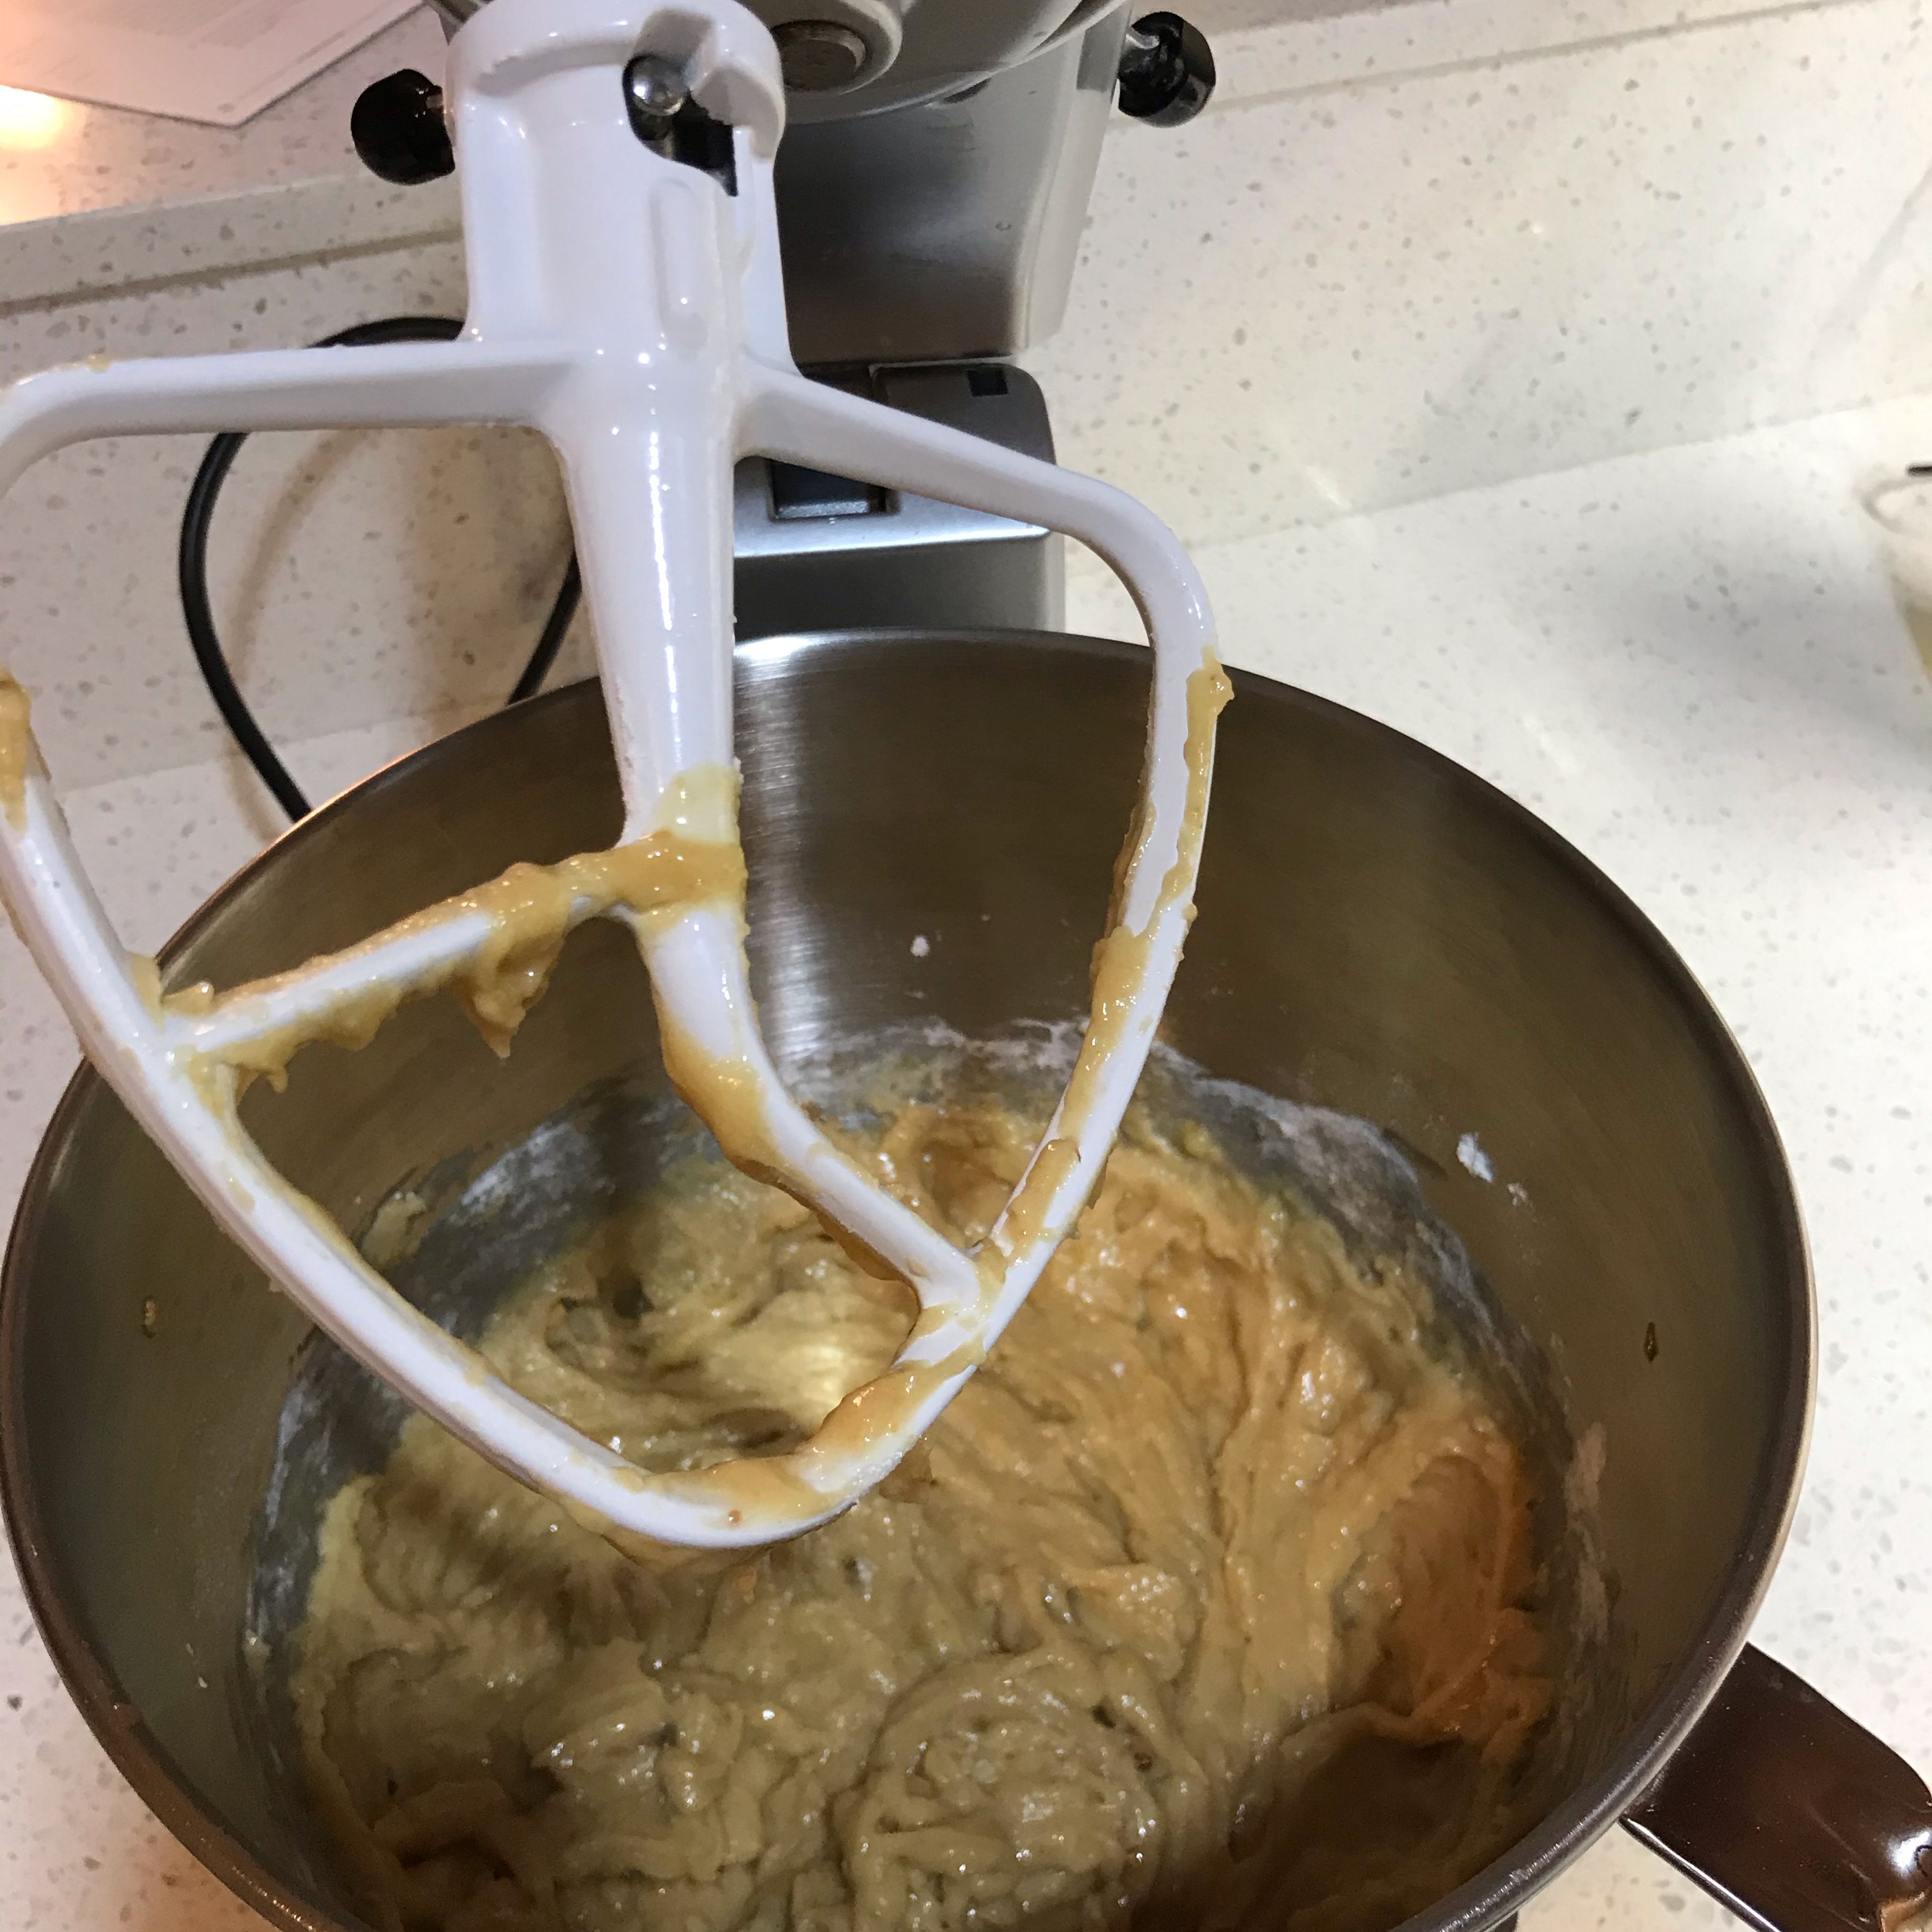 Add the flour, baking soda & baking powder into the mixing bowl. Use the low setting, mix thoroughly until no dry spots remain. Don’t overwork the batter.